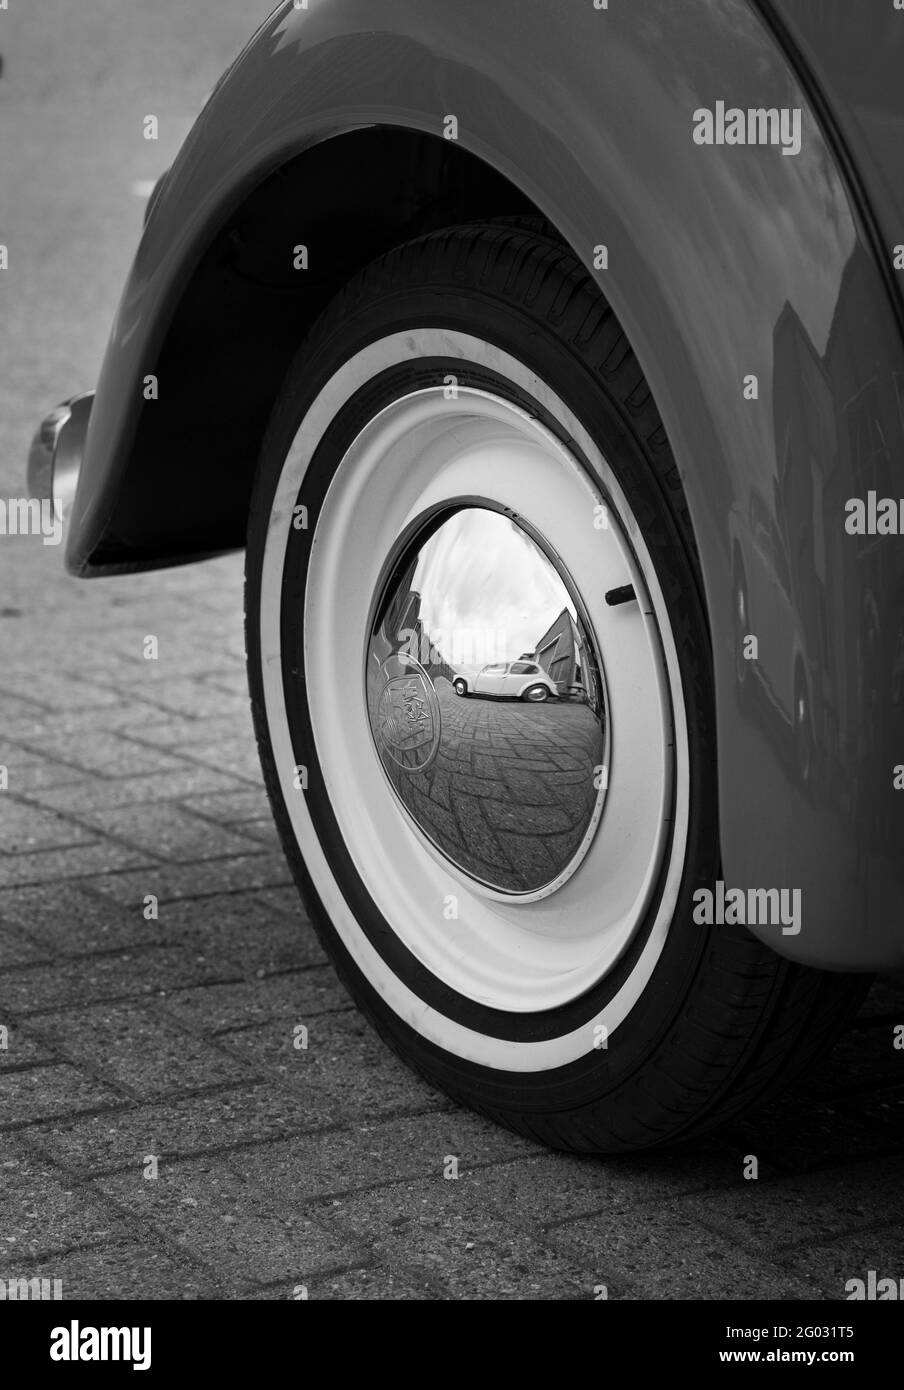 ZOETERMEER, NETHERLANDS - May 20, 2021: Retro car Volkswagen Beetle black and white shot of a rear wheel with a reflection of a VW Beetle in it. Stock Photo